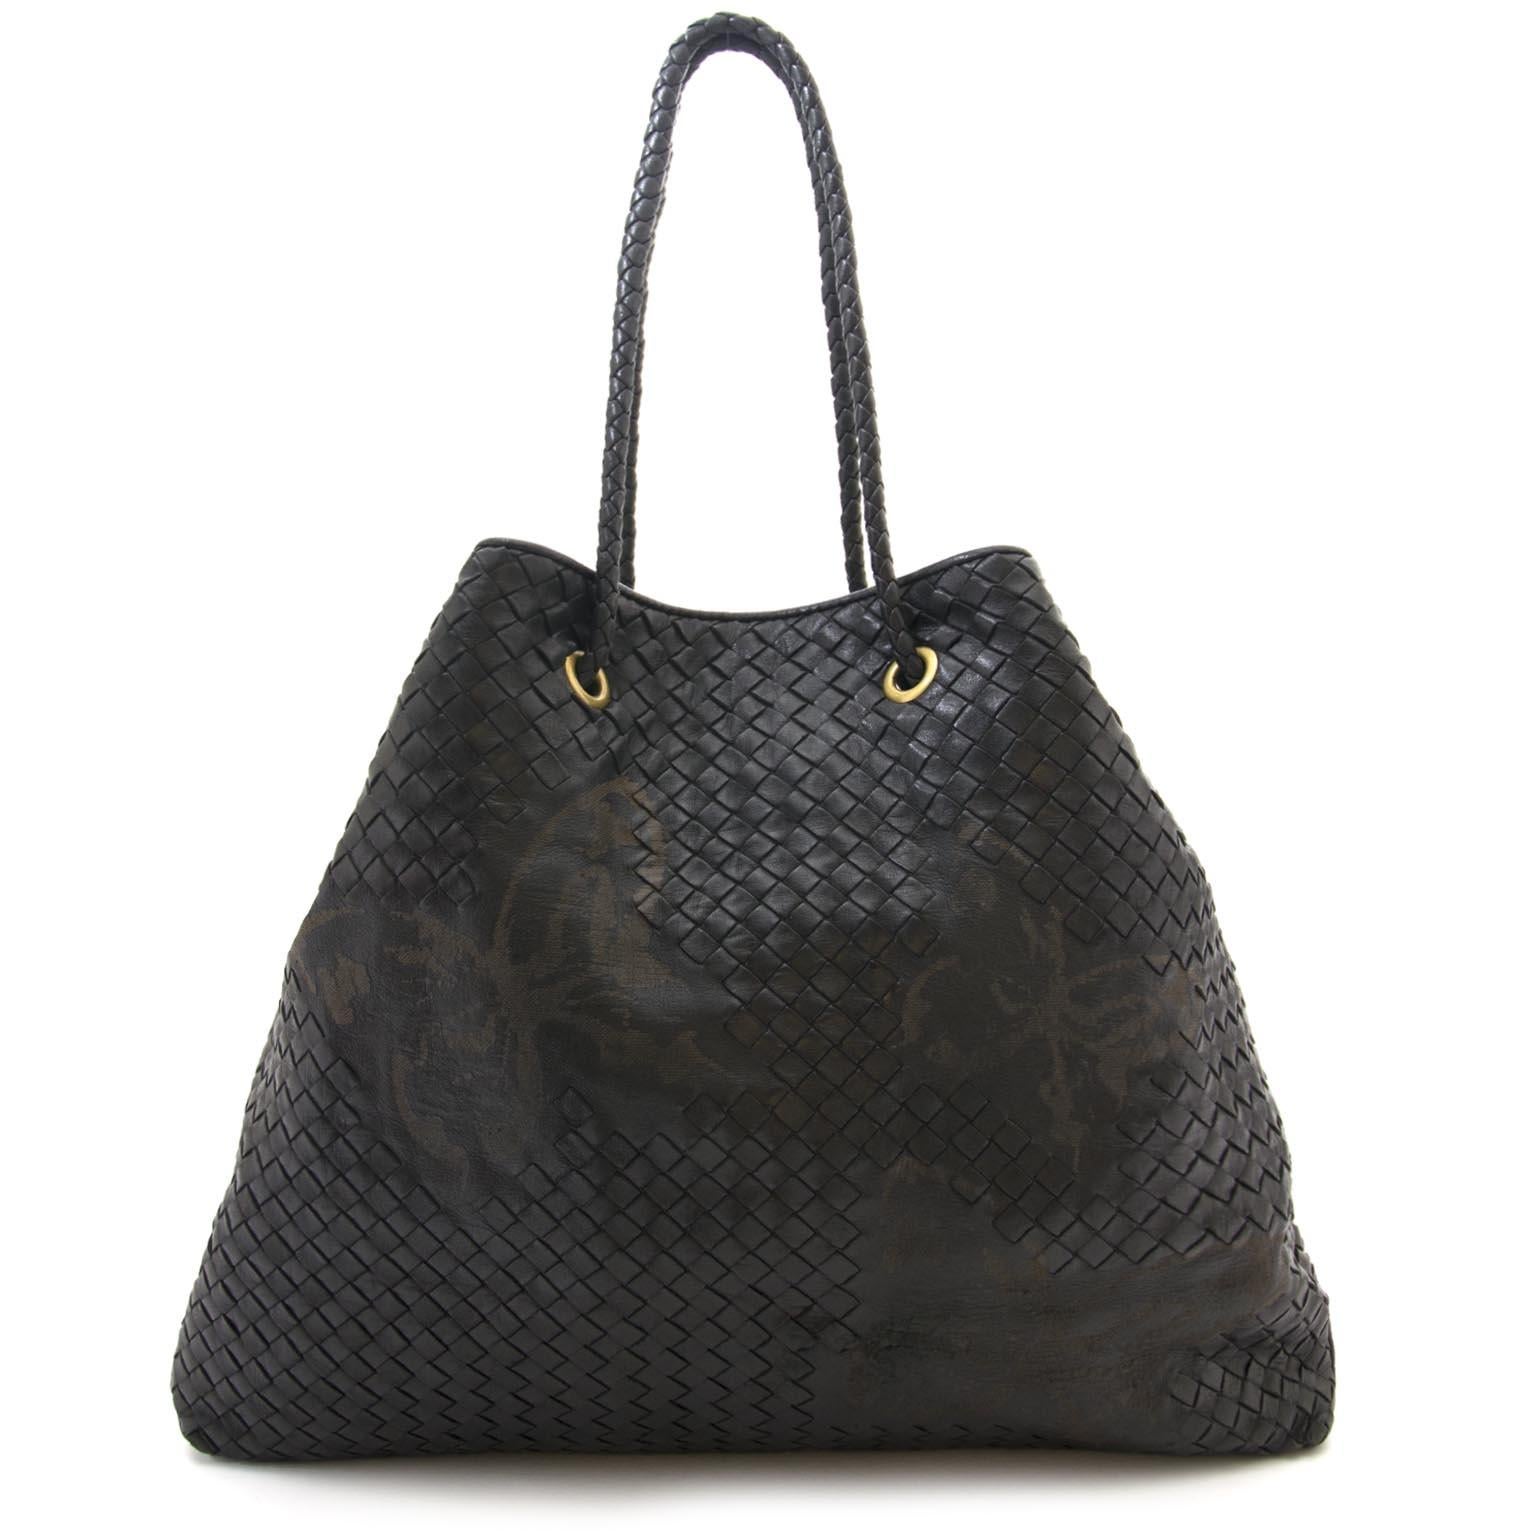 Very good condition

Bottega Veneta Waxed Leather Intrecciato Farfalle Drawstring Bag Nero Black

This stylish shoulder bag is crafted of waxed leather with embossed butterflies across the bag. The bag features woven leather shoulder straps, cinch